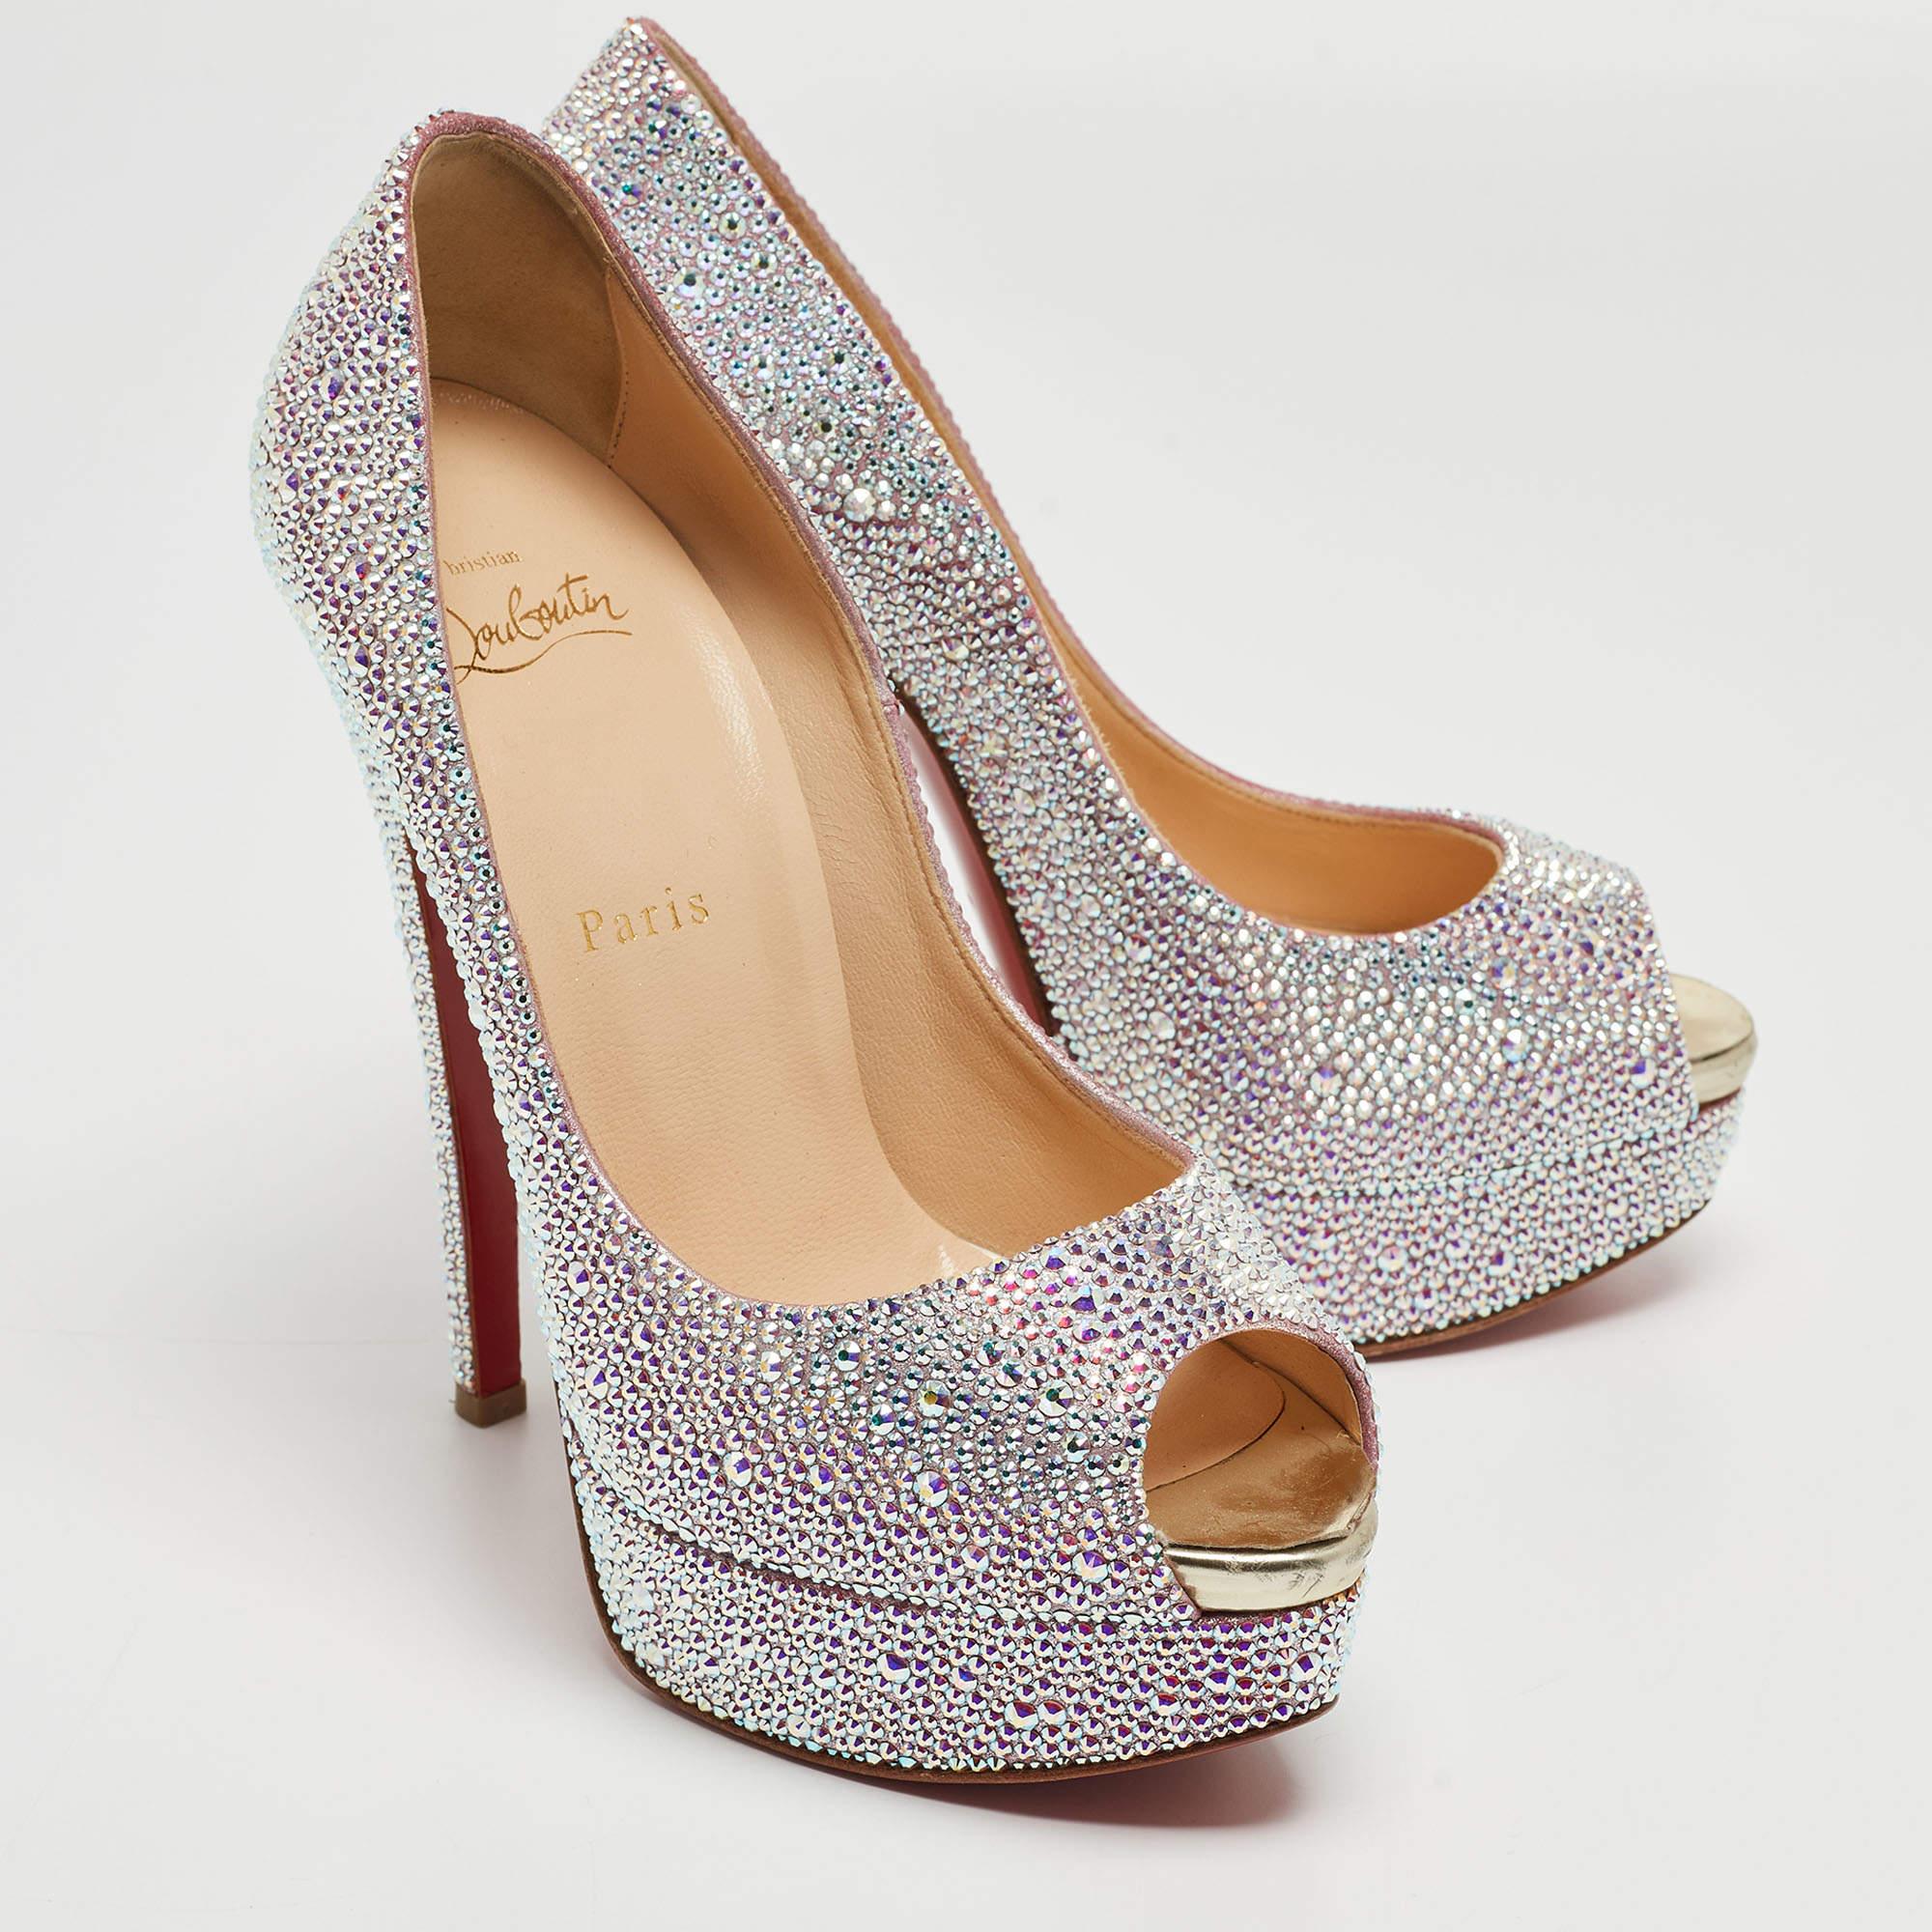 Christian Louboutin Silver Crystal Embellished Very Riche Pumps Size 38 In Good Condition For Sale In Dubai, Al Qouz 2